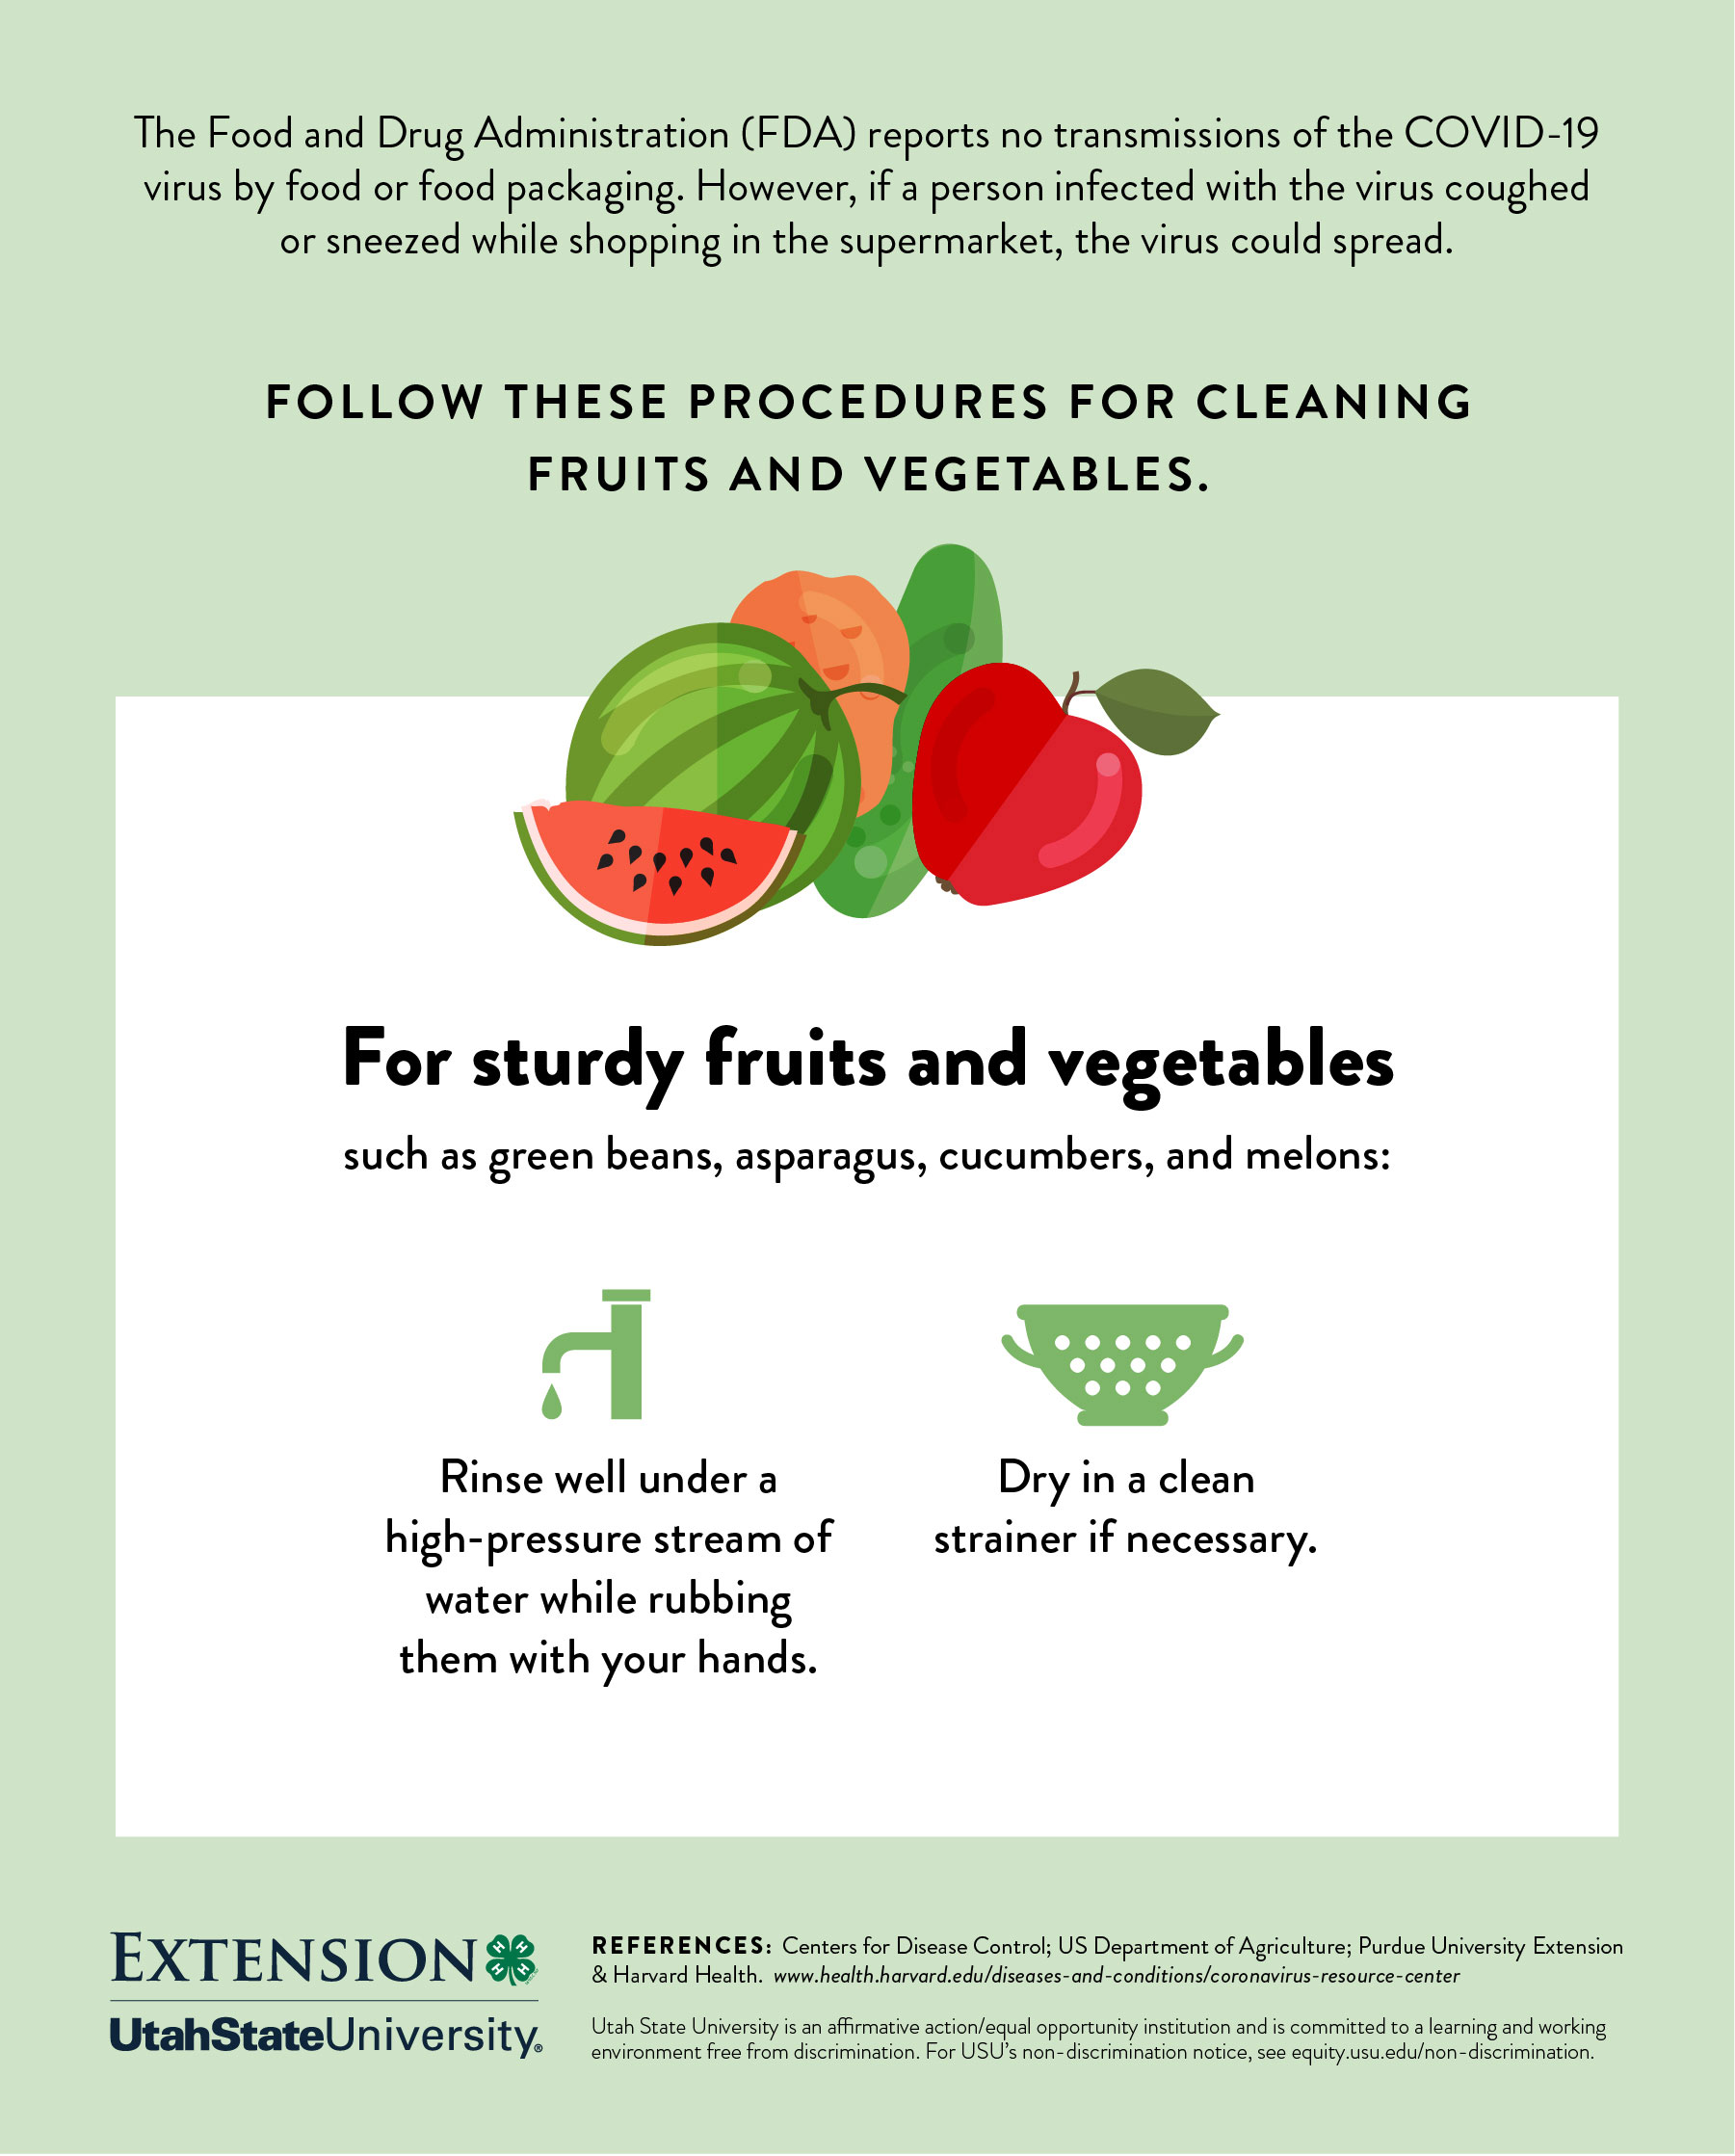 Cleaning sturdy fruits and veggies